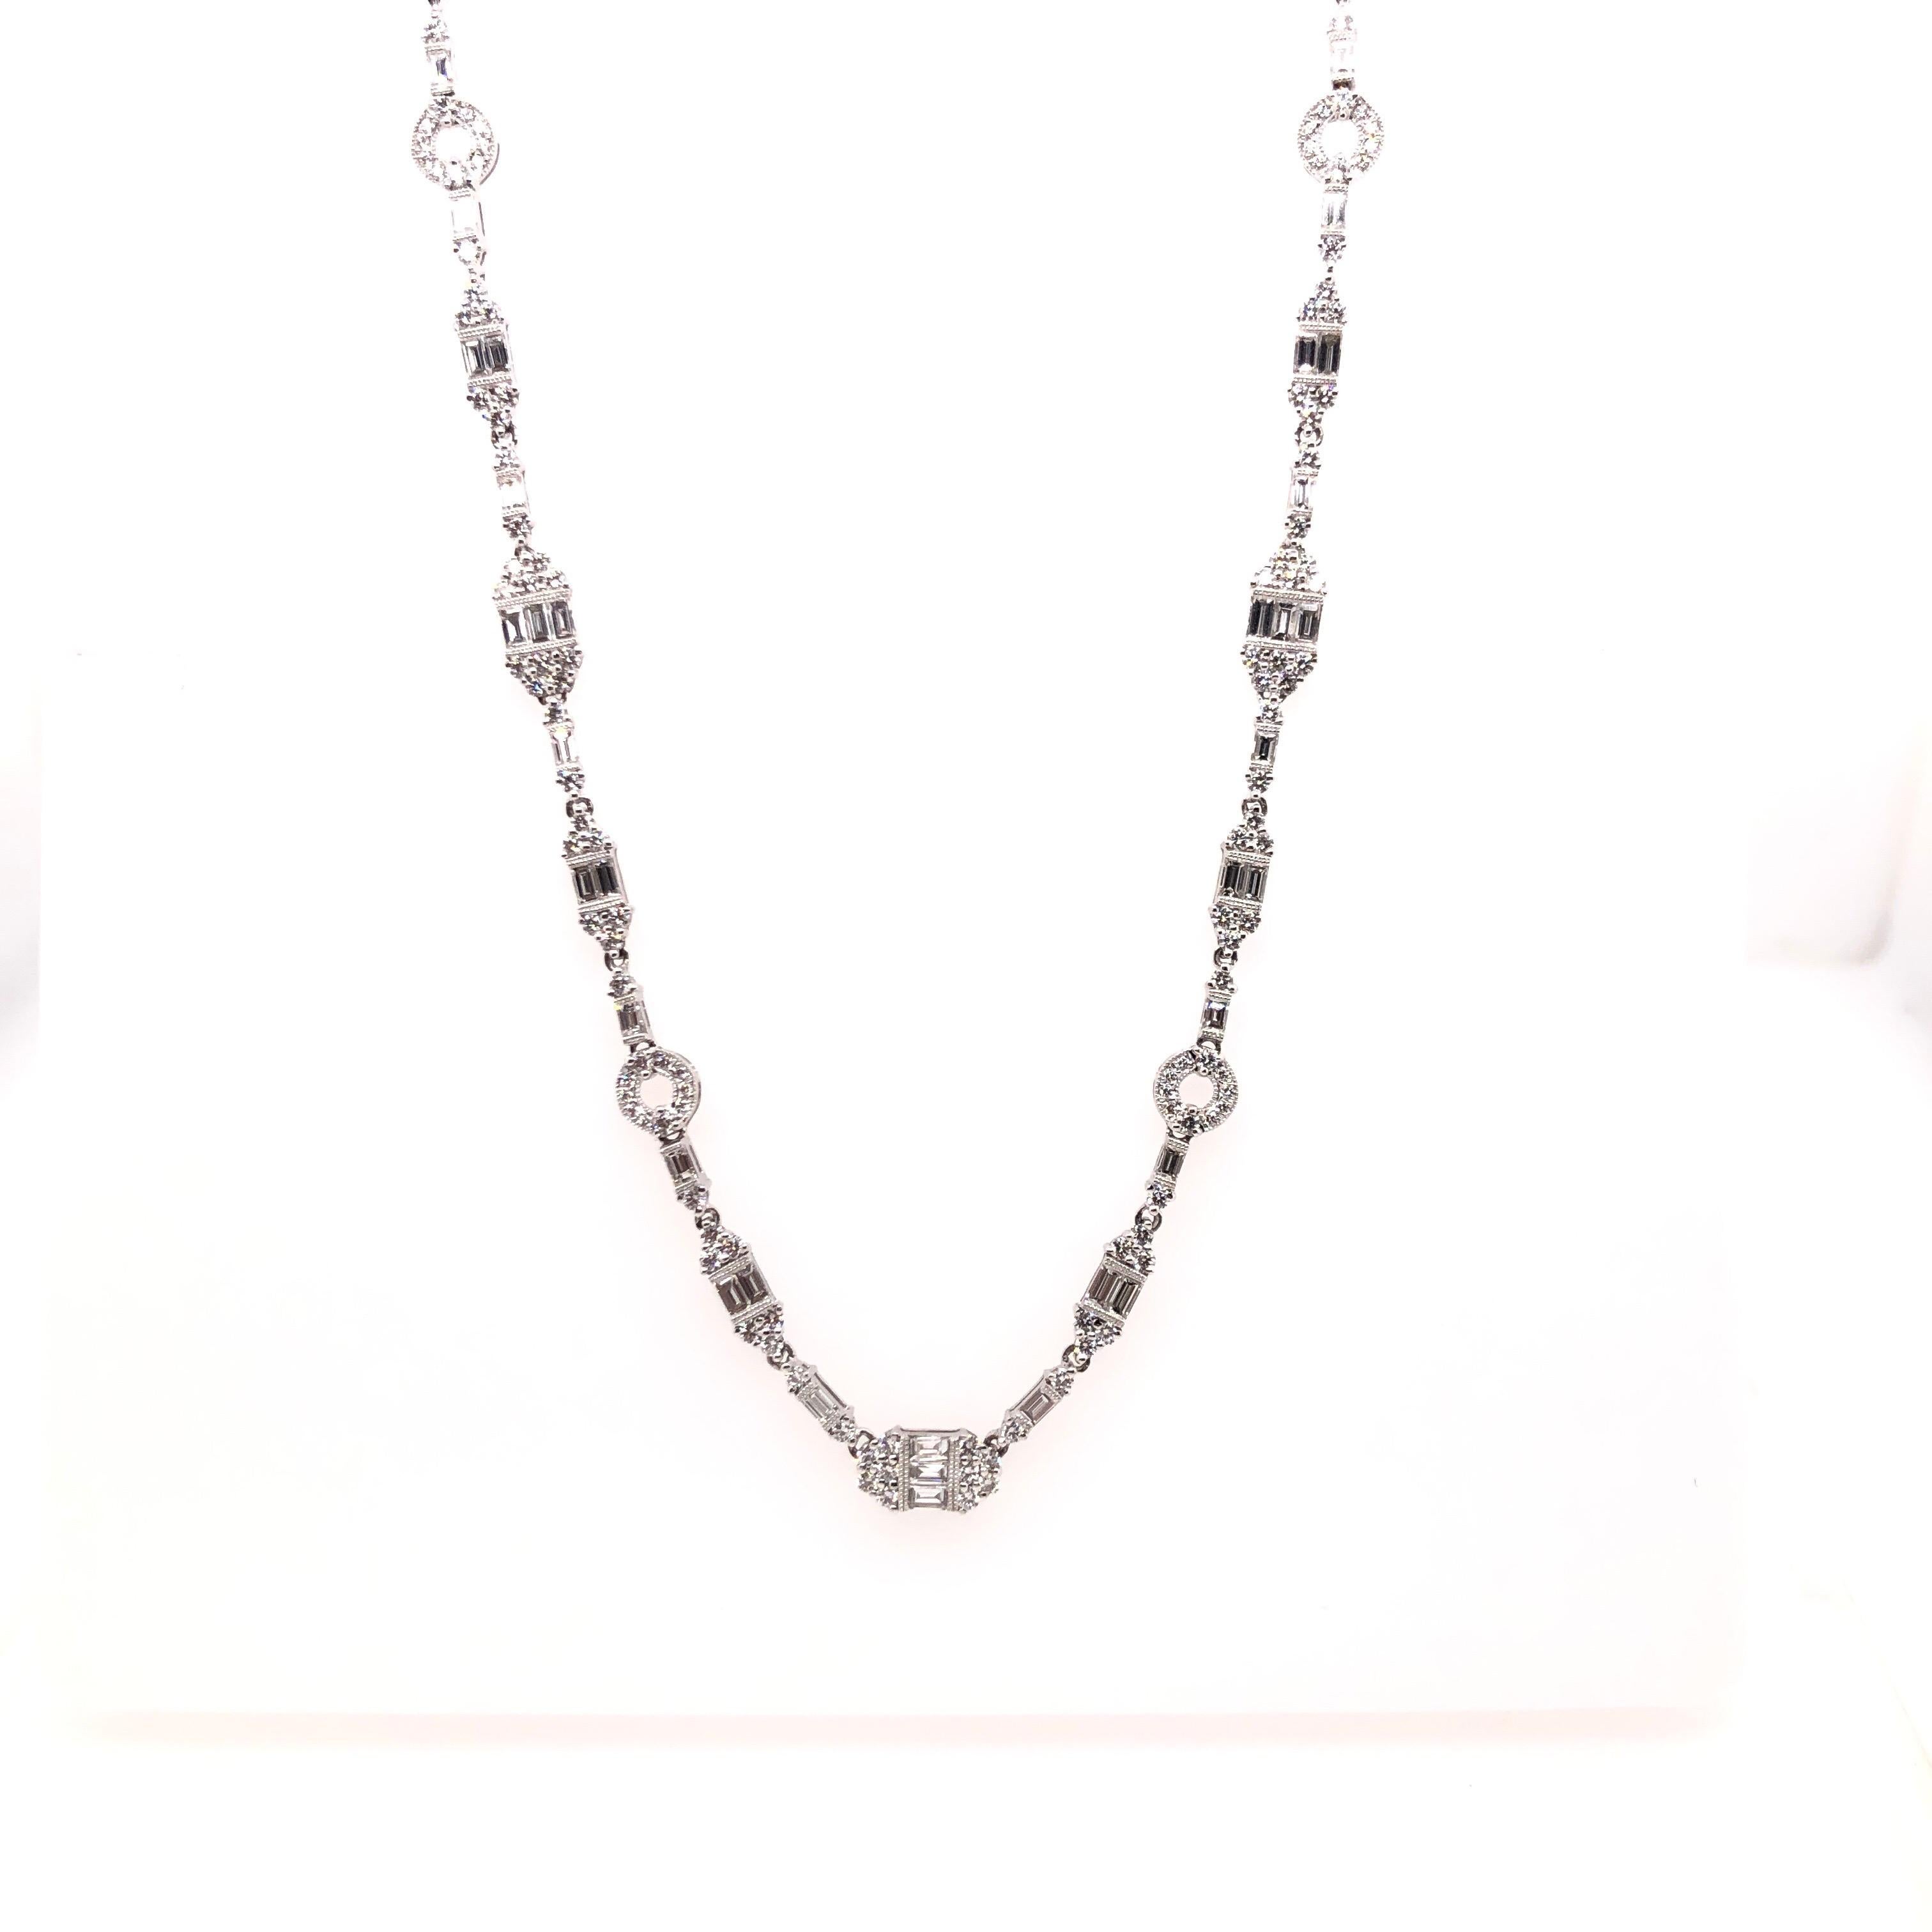 Modern Jye’s White Gold Necklace of Baguette and Round Diamonds